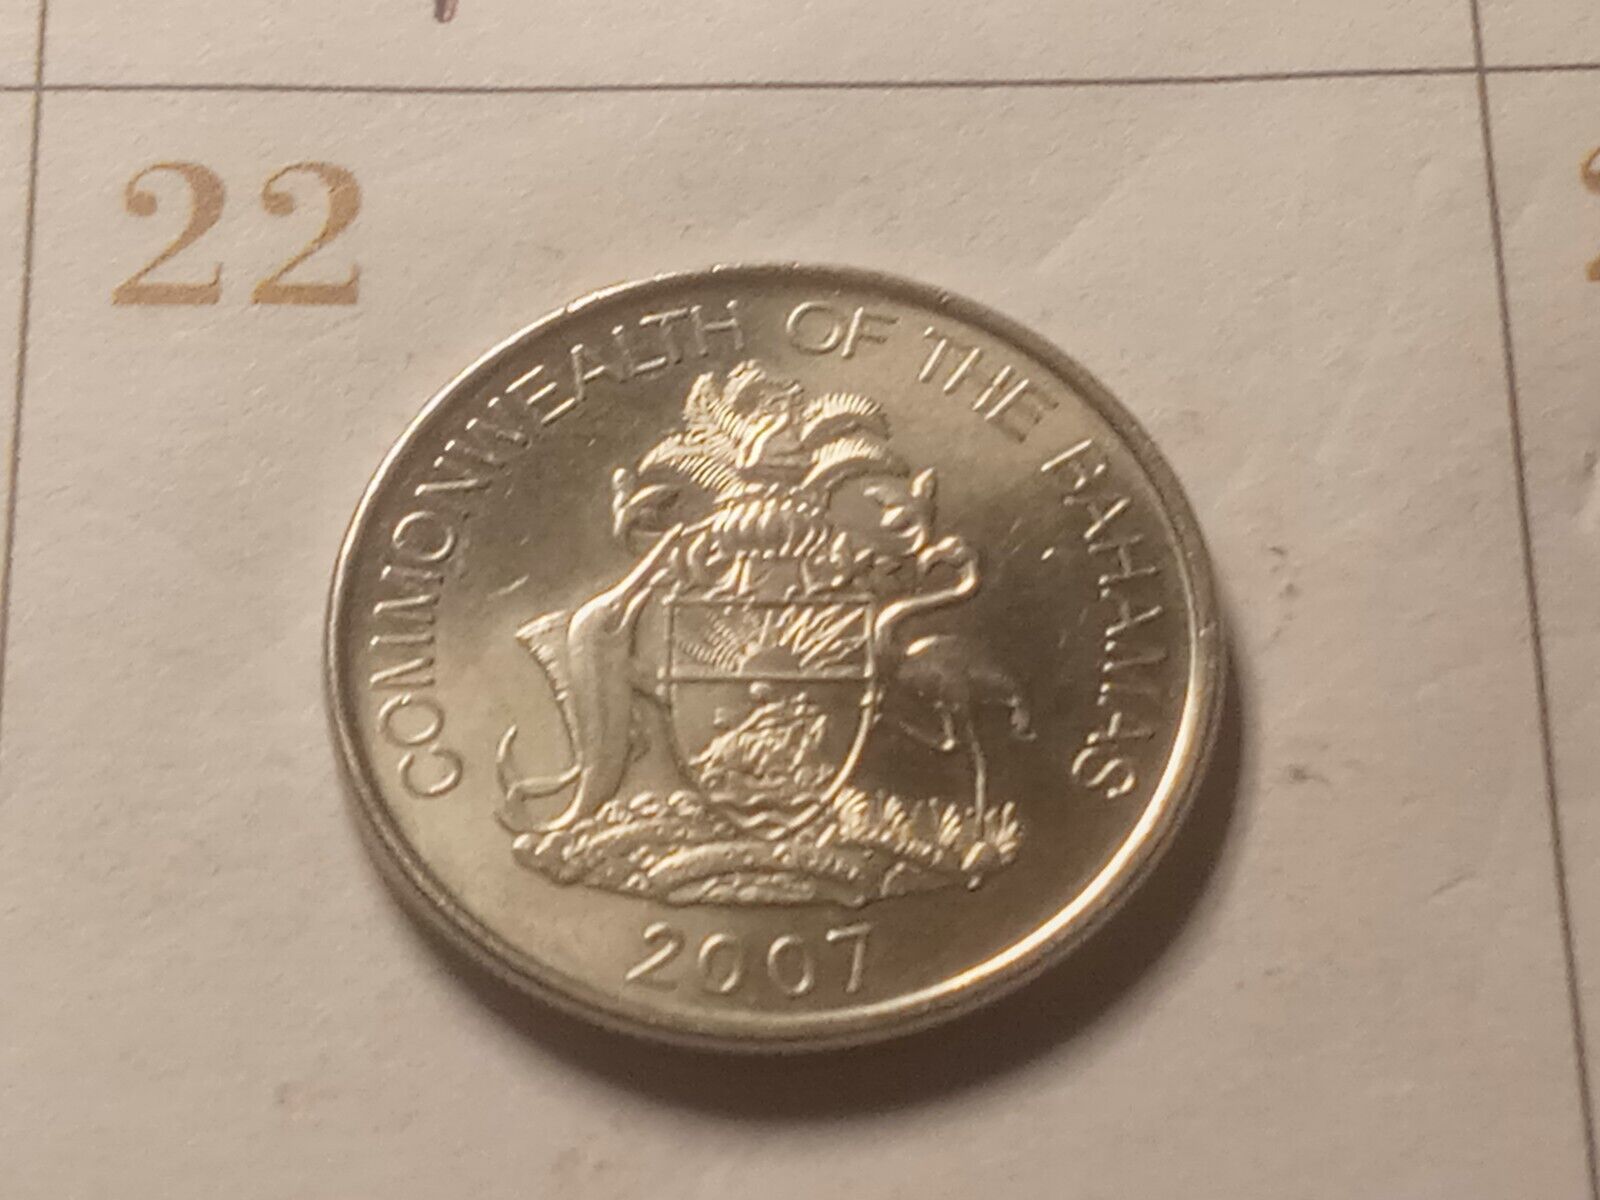 2007 Commonwealth Of The Bahamas $0.25 Silver Tone Coin Gorgeous Detail